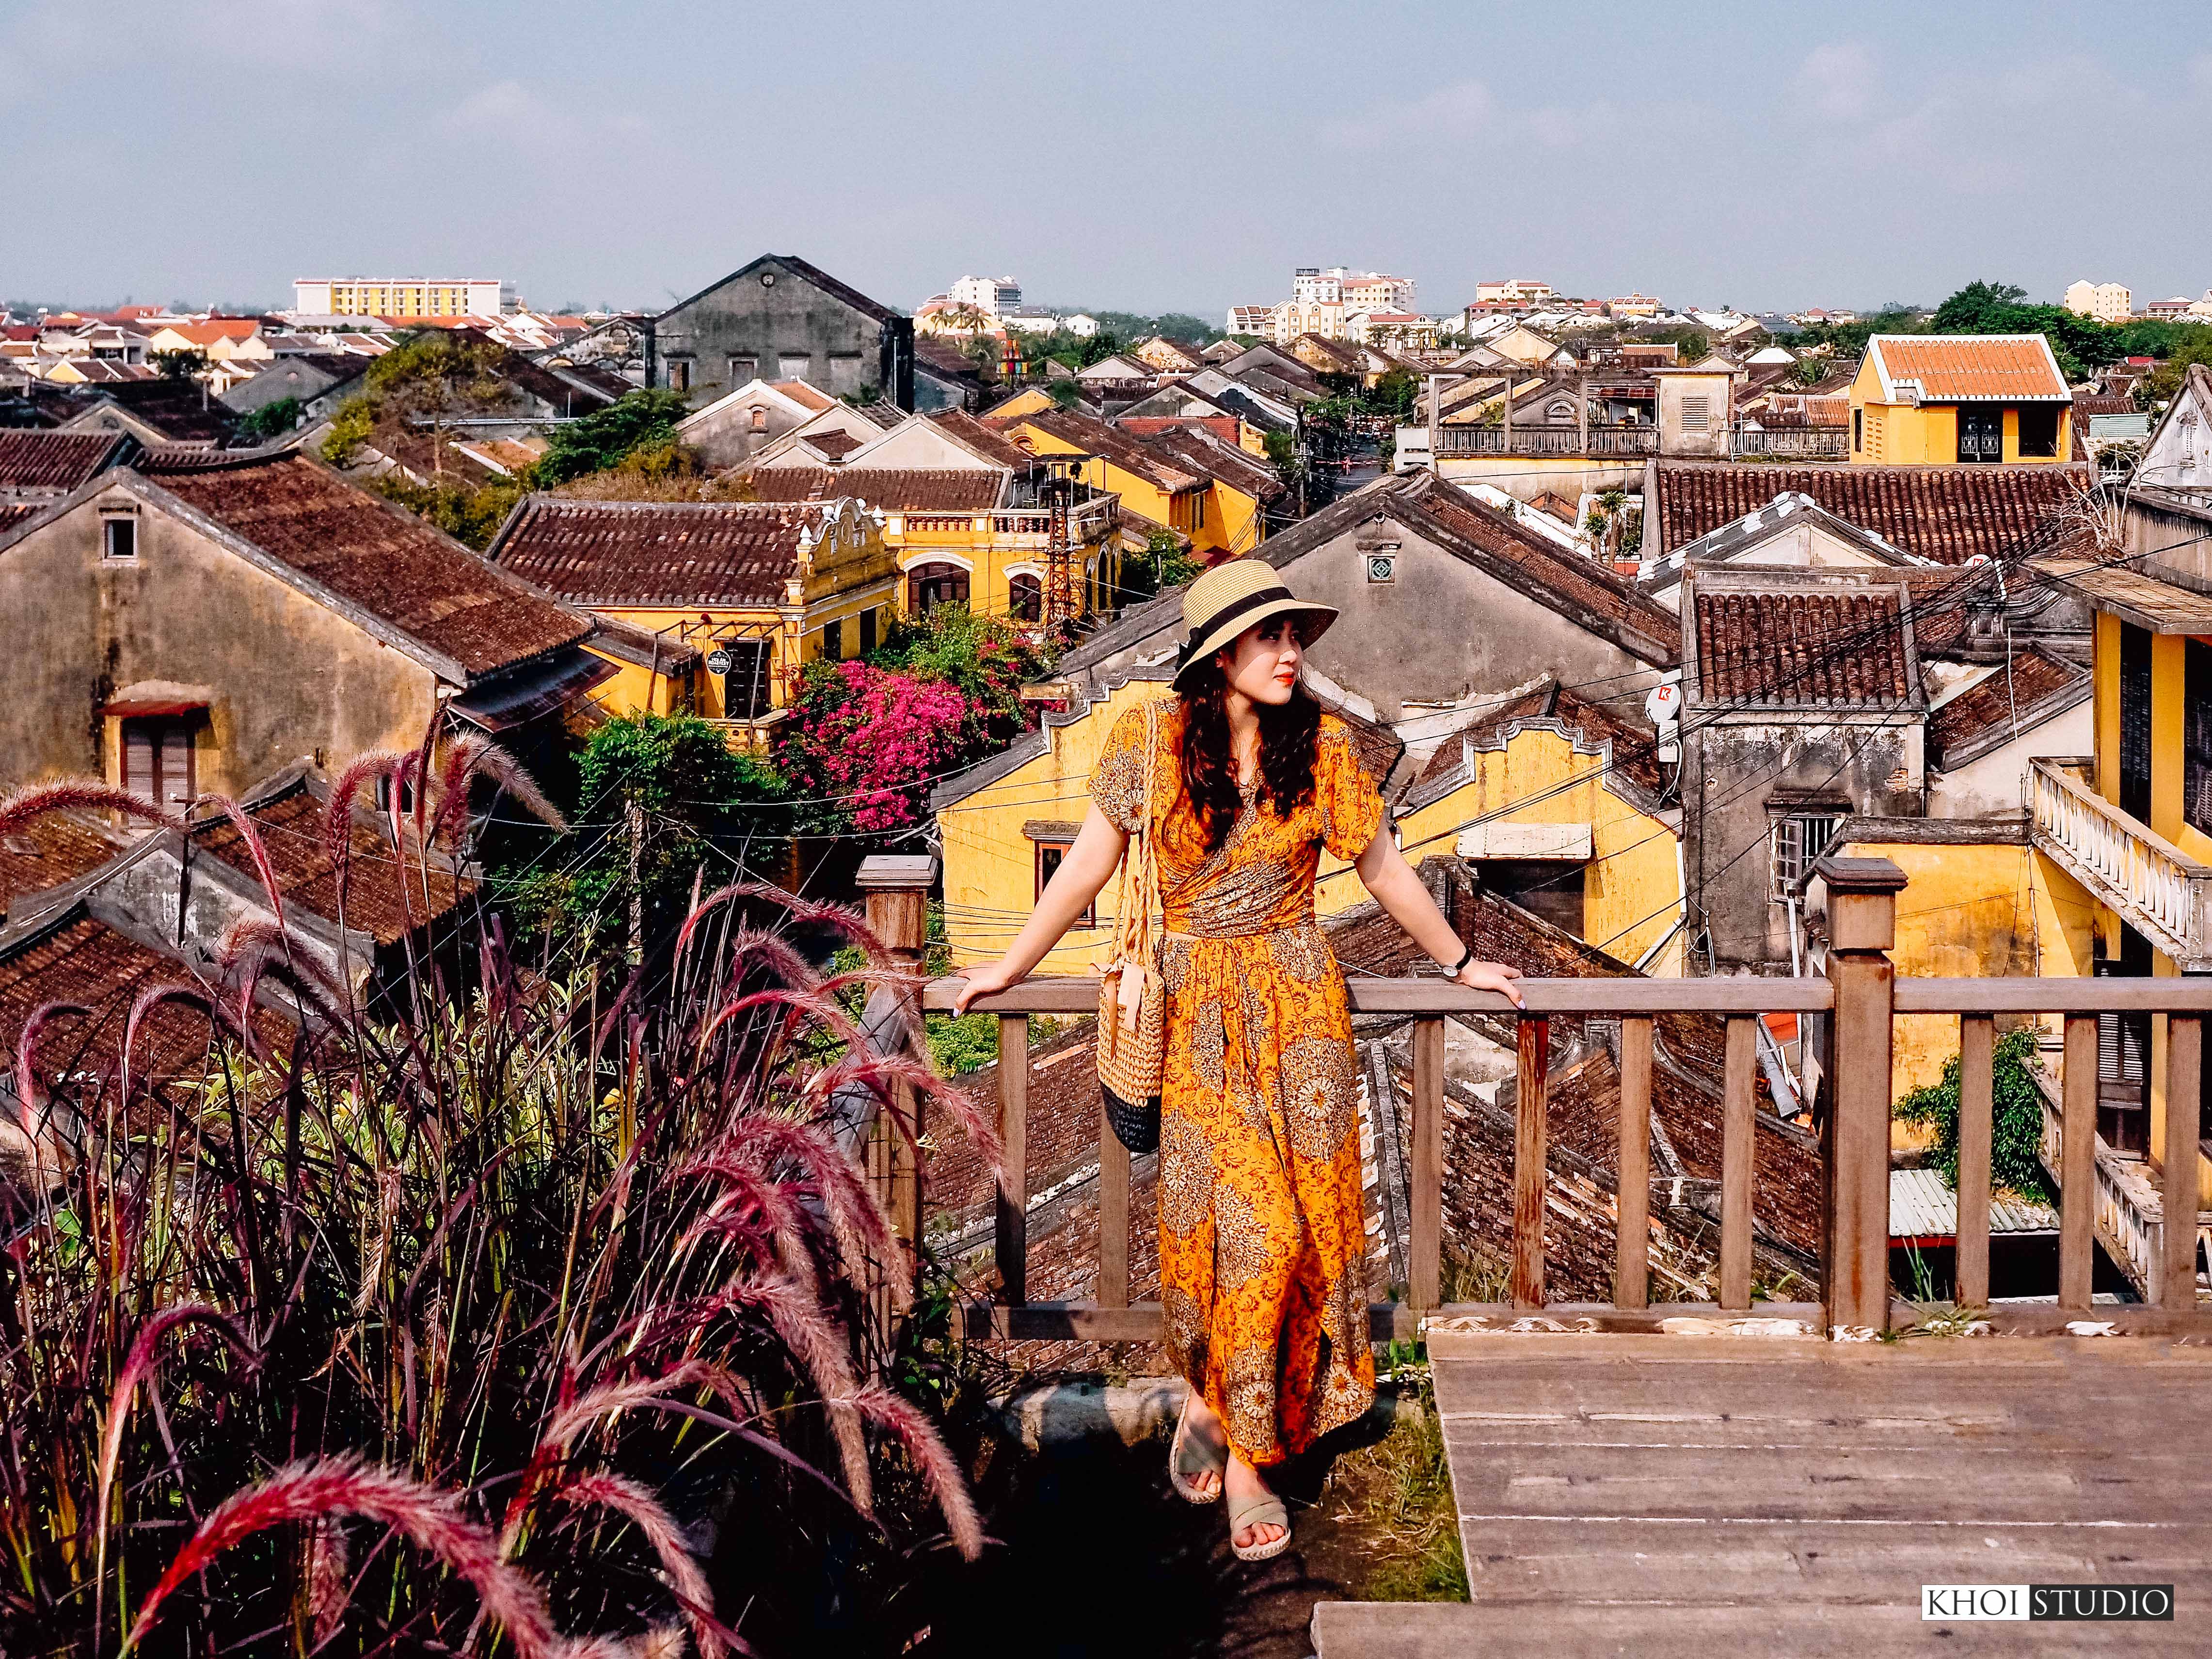 Family travel photo session in Hoi An ancient town: Outdoor photo shoot with mom